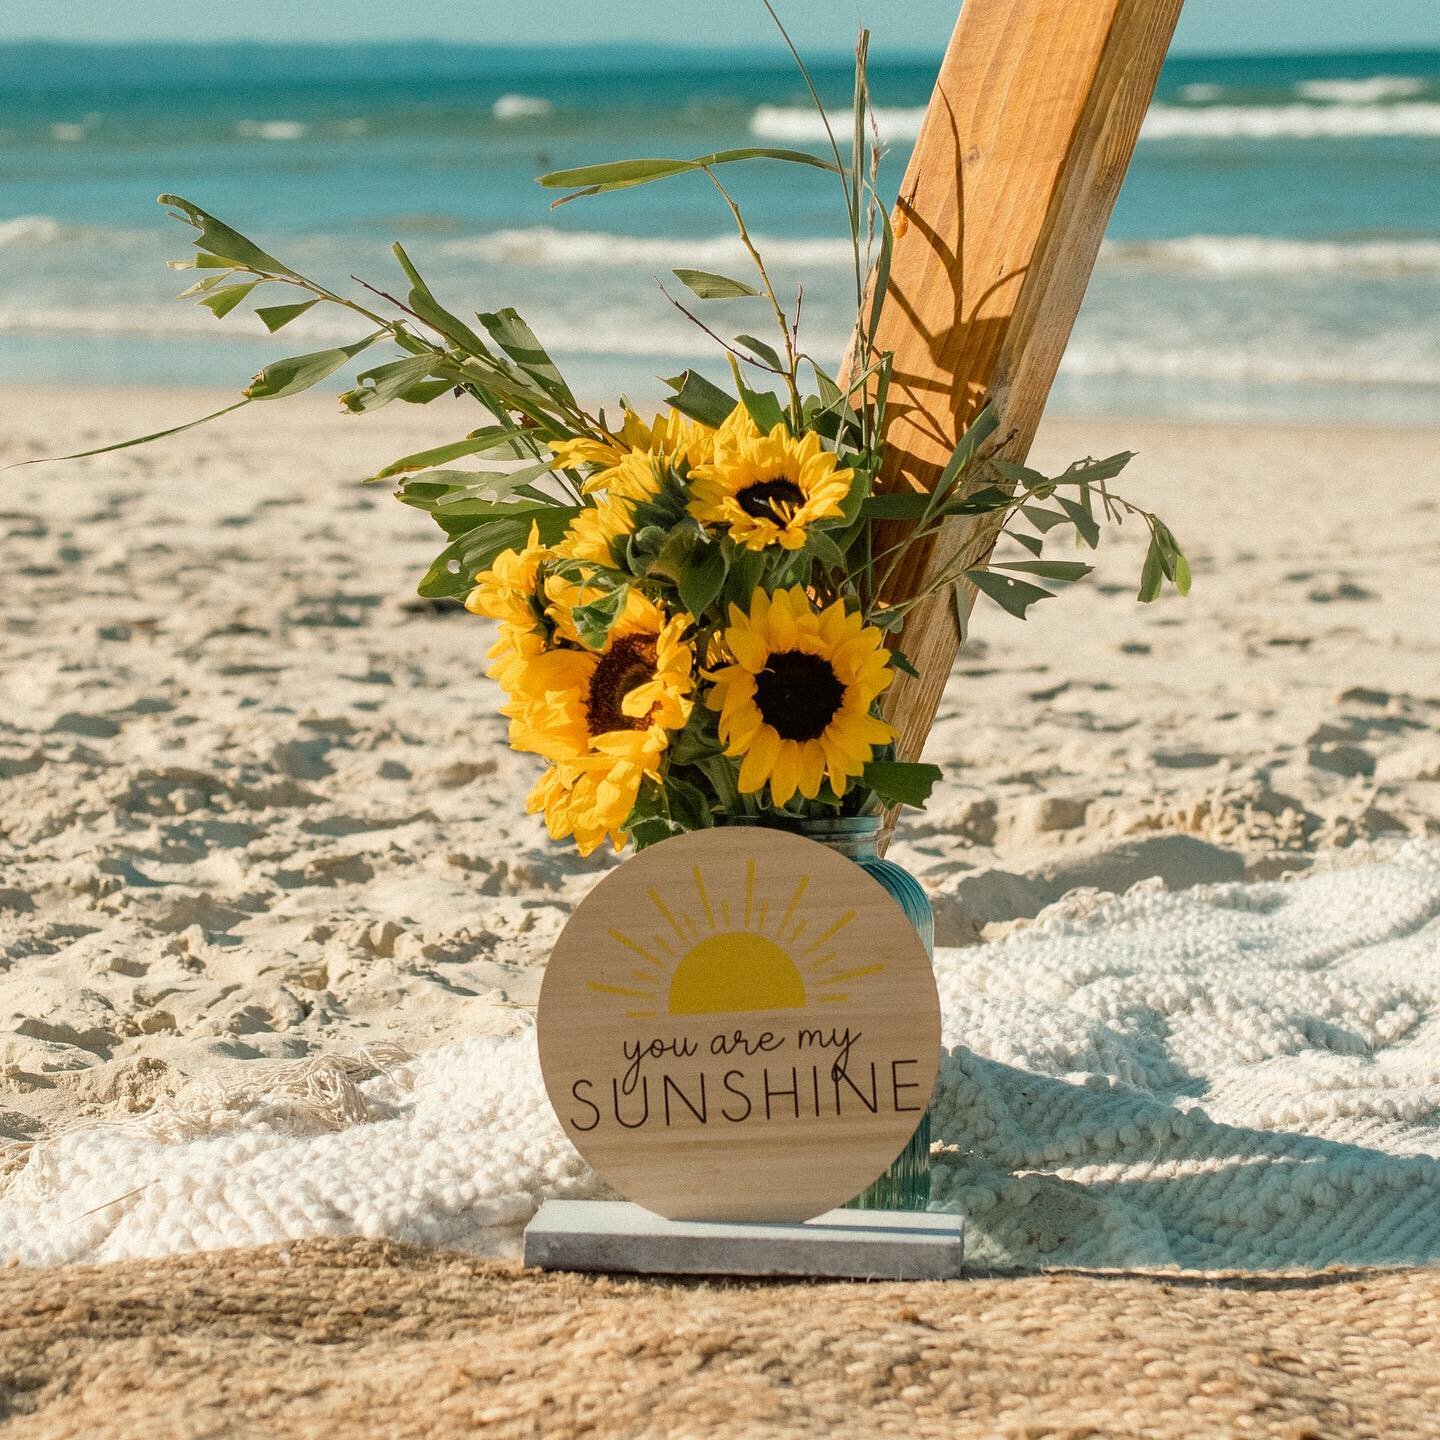 Hoping you&rsquo;re feeling tall, golden and shining brightly today 🌻💛

Captured at our co-founder, Kim&rsquo;s wedding earlier this year 🥰

#youaremysunshine #sunflower #oneandaum #beachwedding #shine